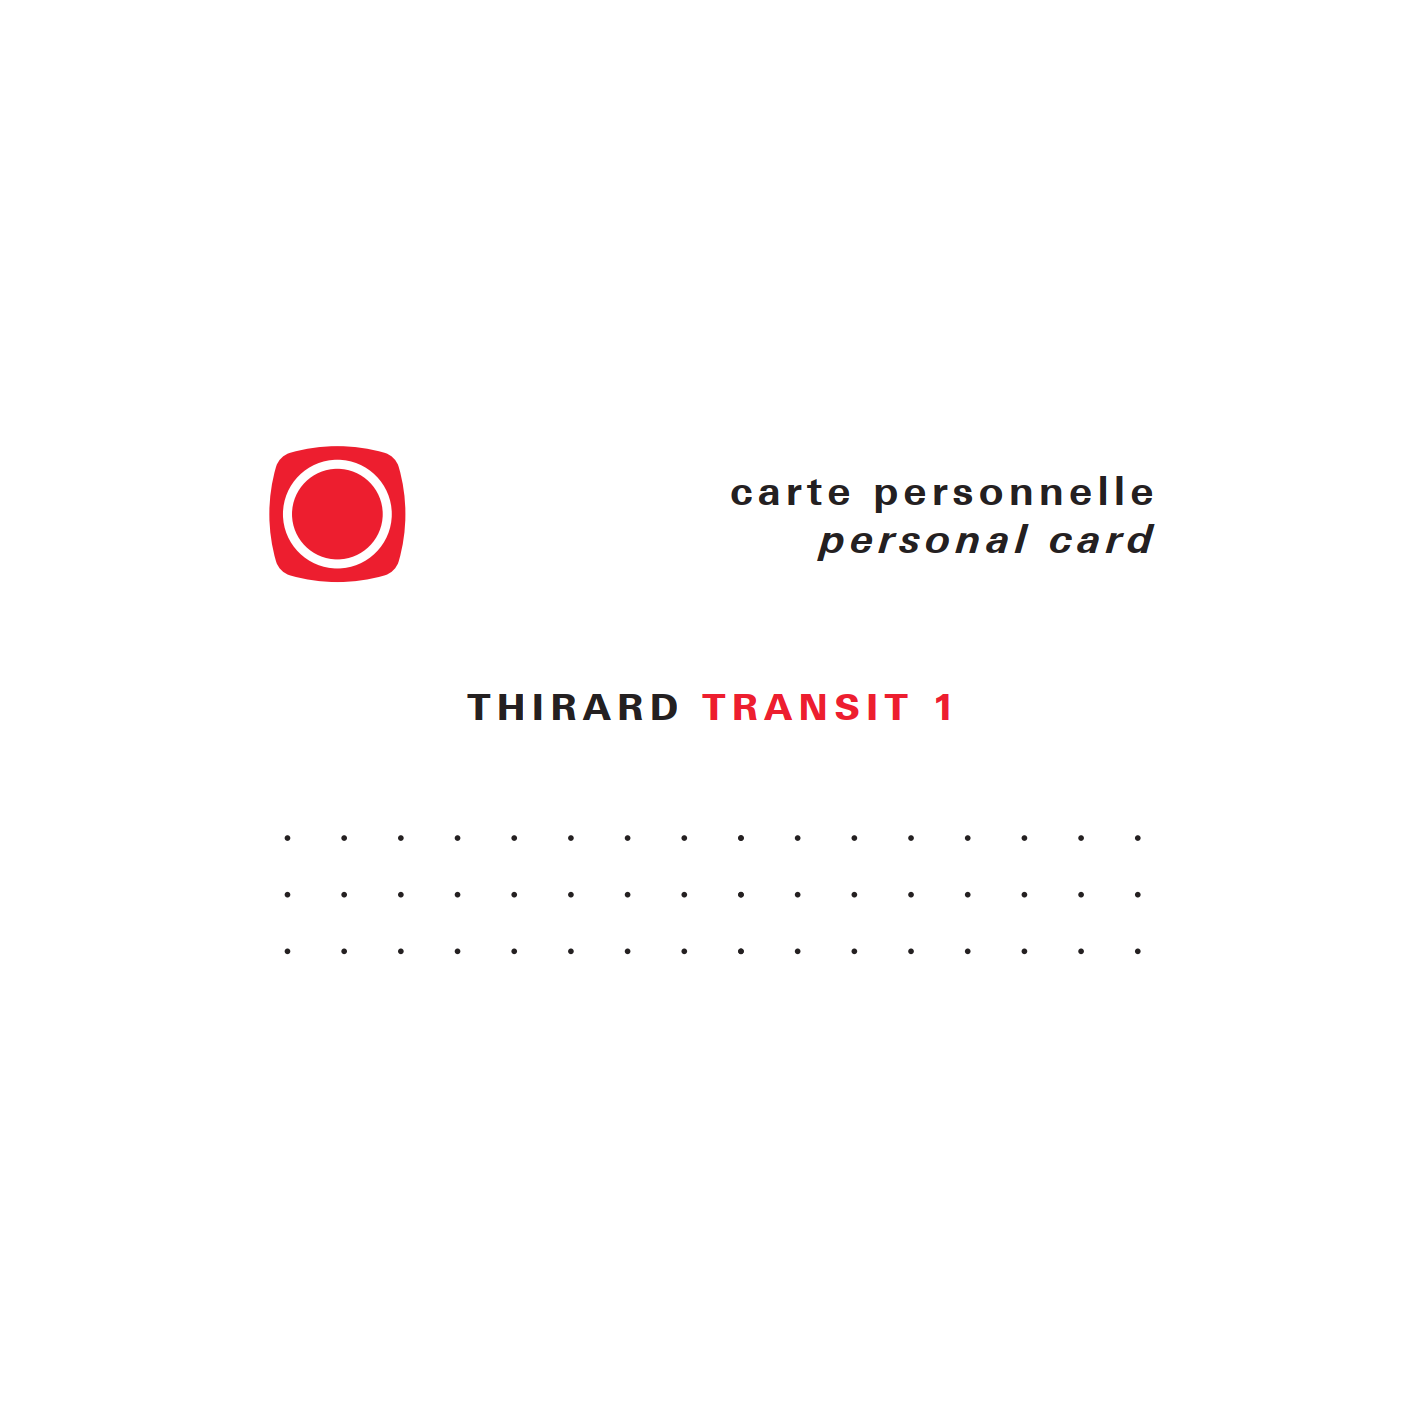 THIRARD - Cylindre 50x60 mm 5 clés longues fonction urgence 4